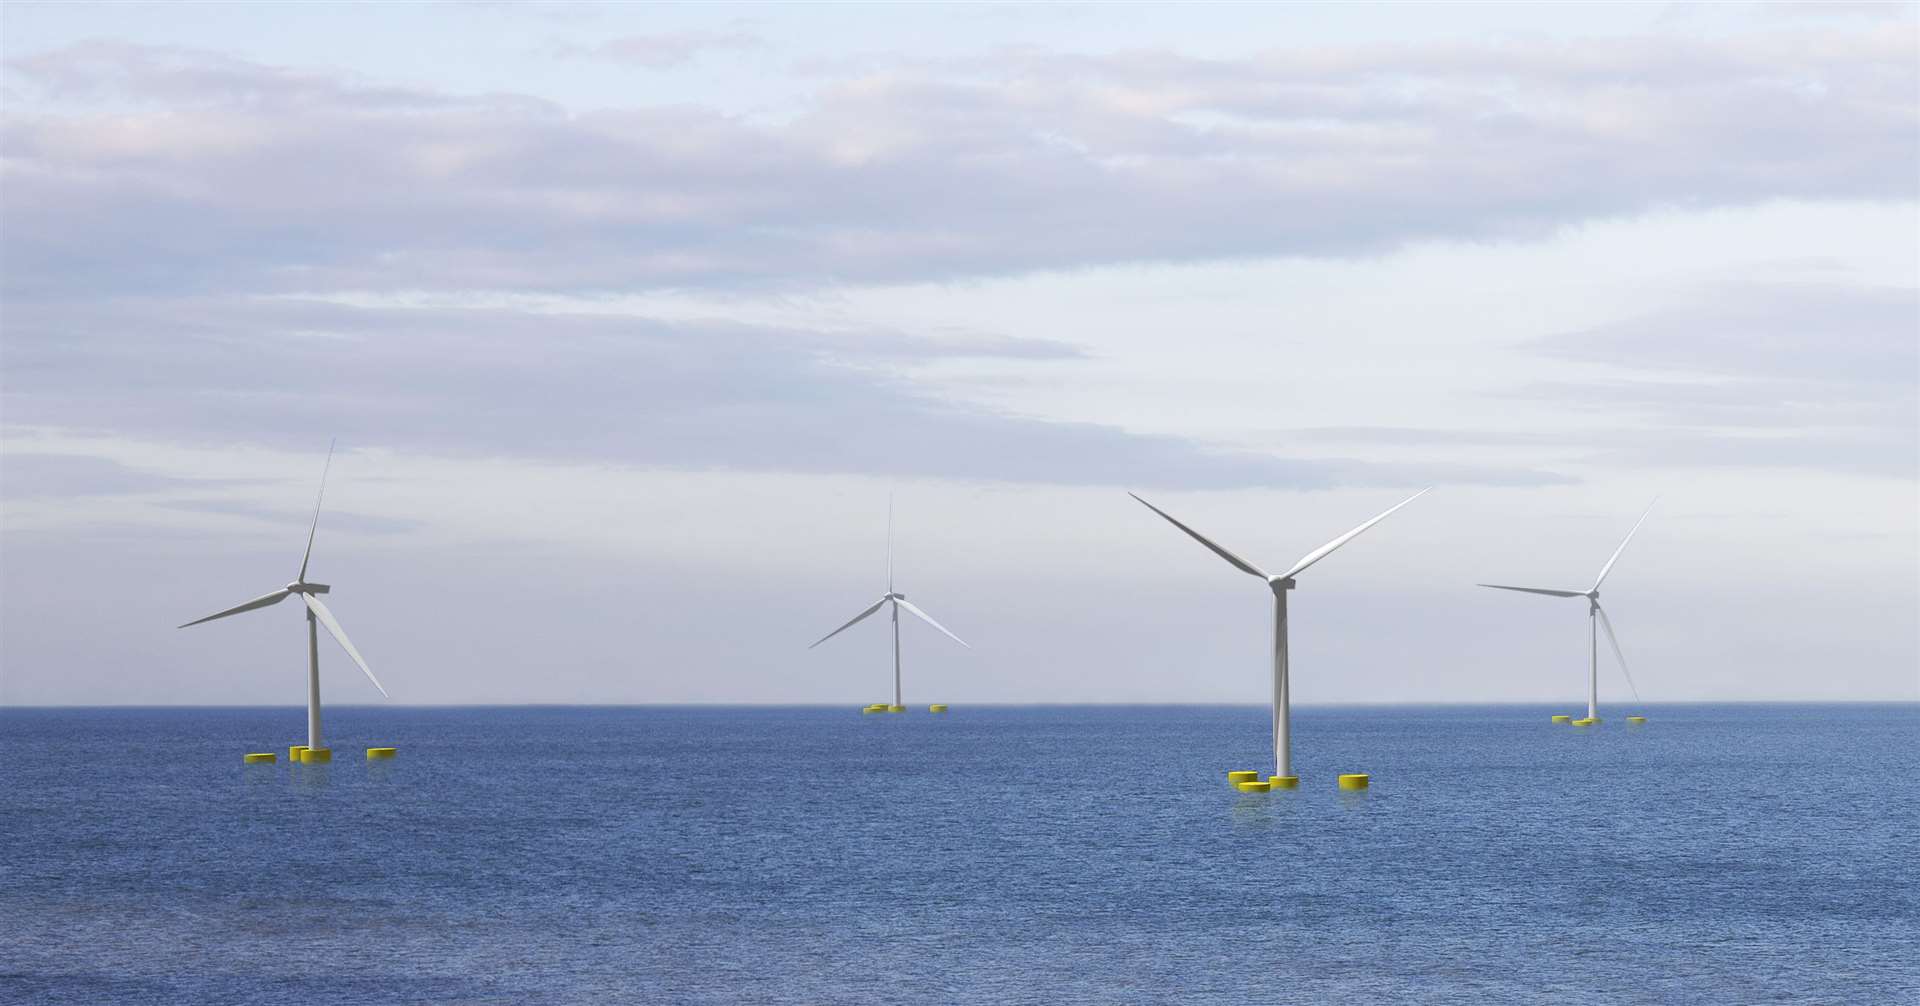 The benefit to the Highlands and Islands from planned wind farm developments could be immense.